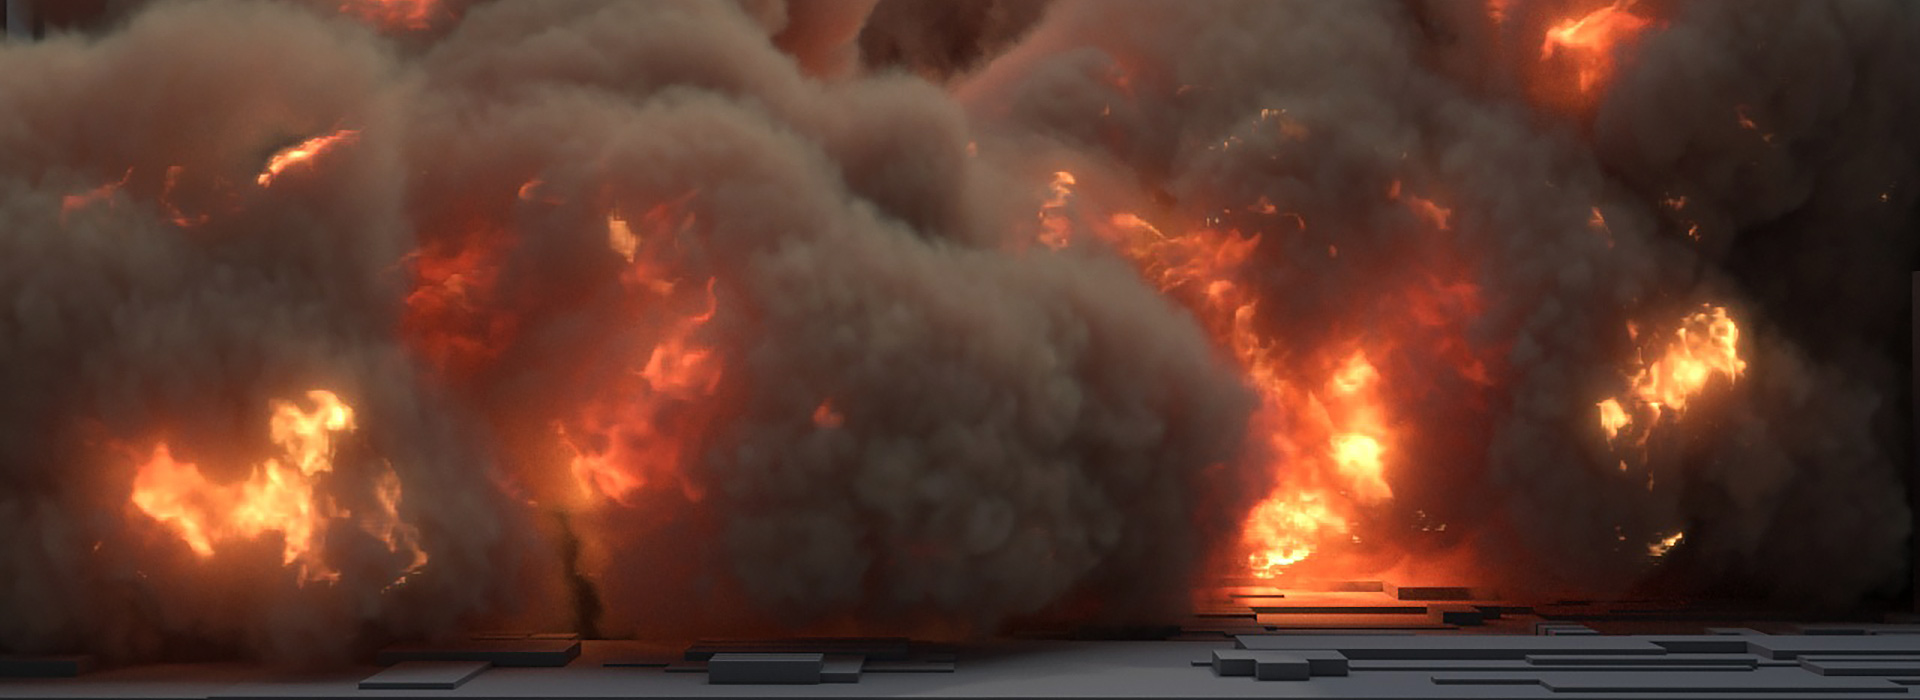 FumeFX explosion tutorial for 3ds max and Cinema 4D